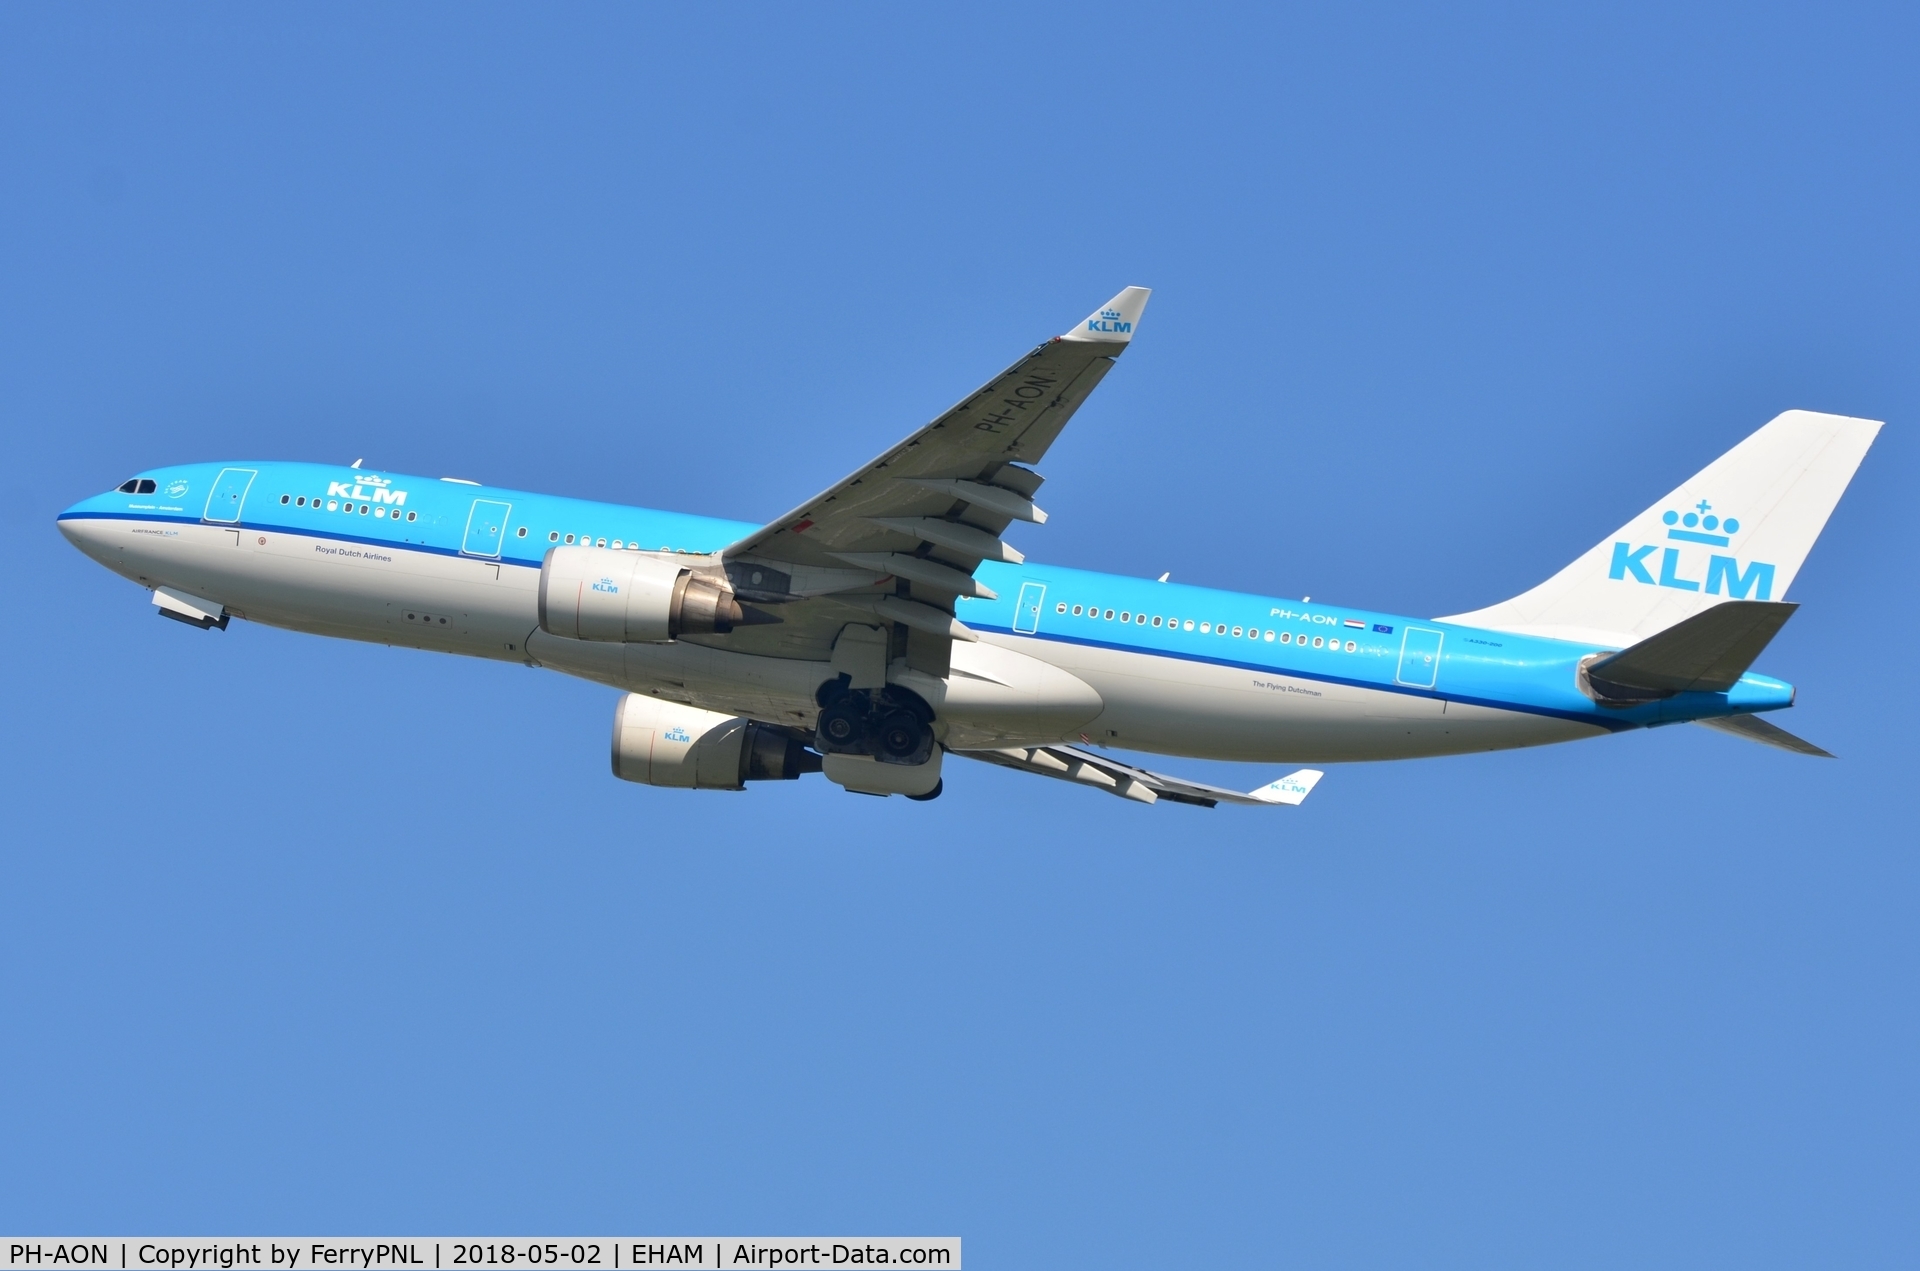 PH-AON, 2008 Airbus A330-203 C/N 925, Departure of KLM A332